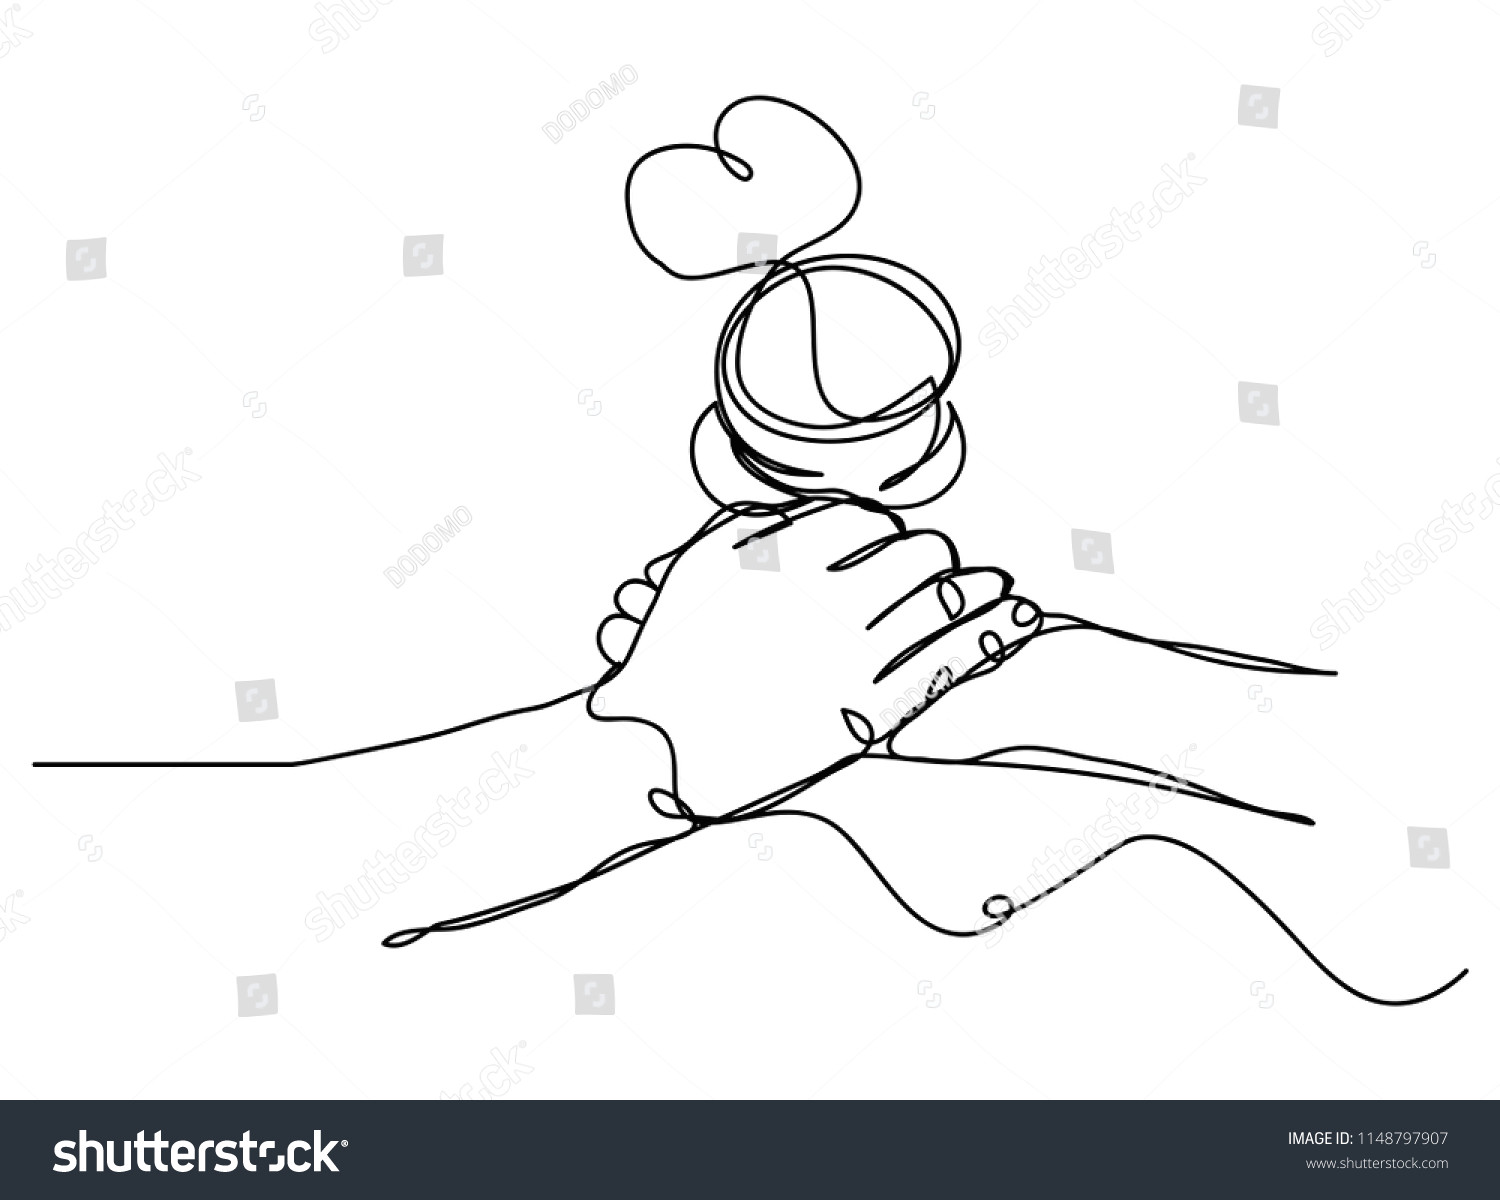 continuous line drawing of men and women hand in hand with love and coffee mug in